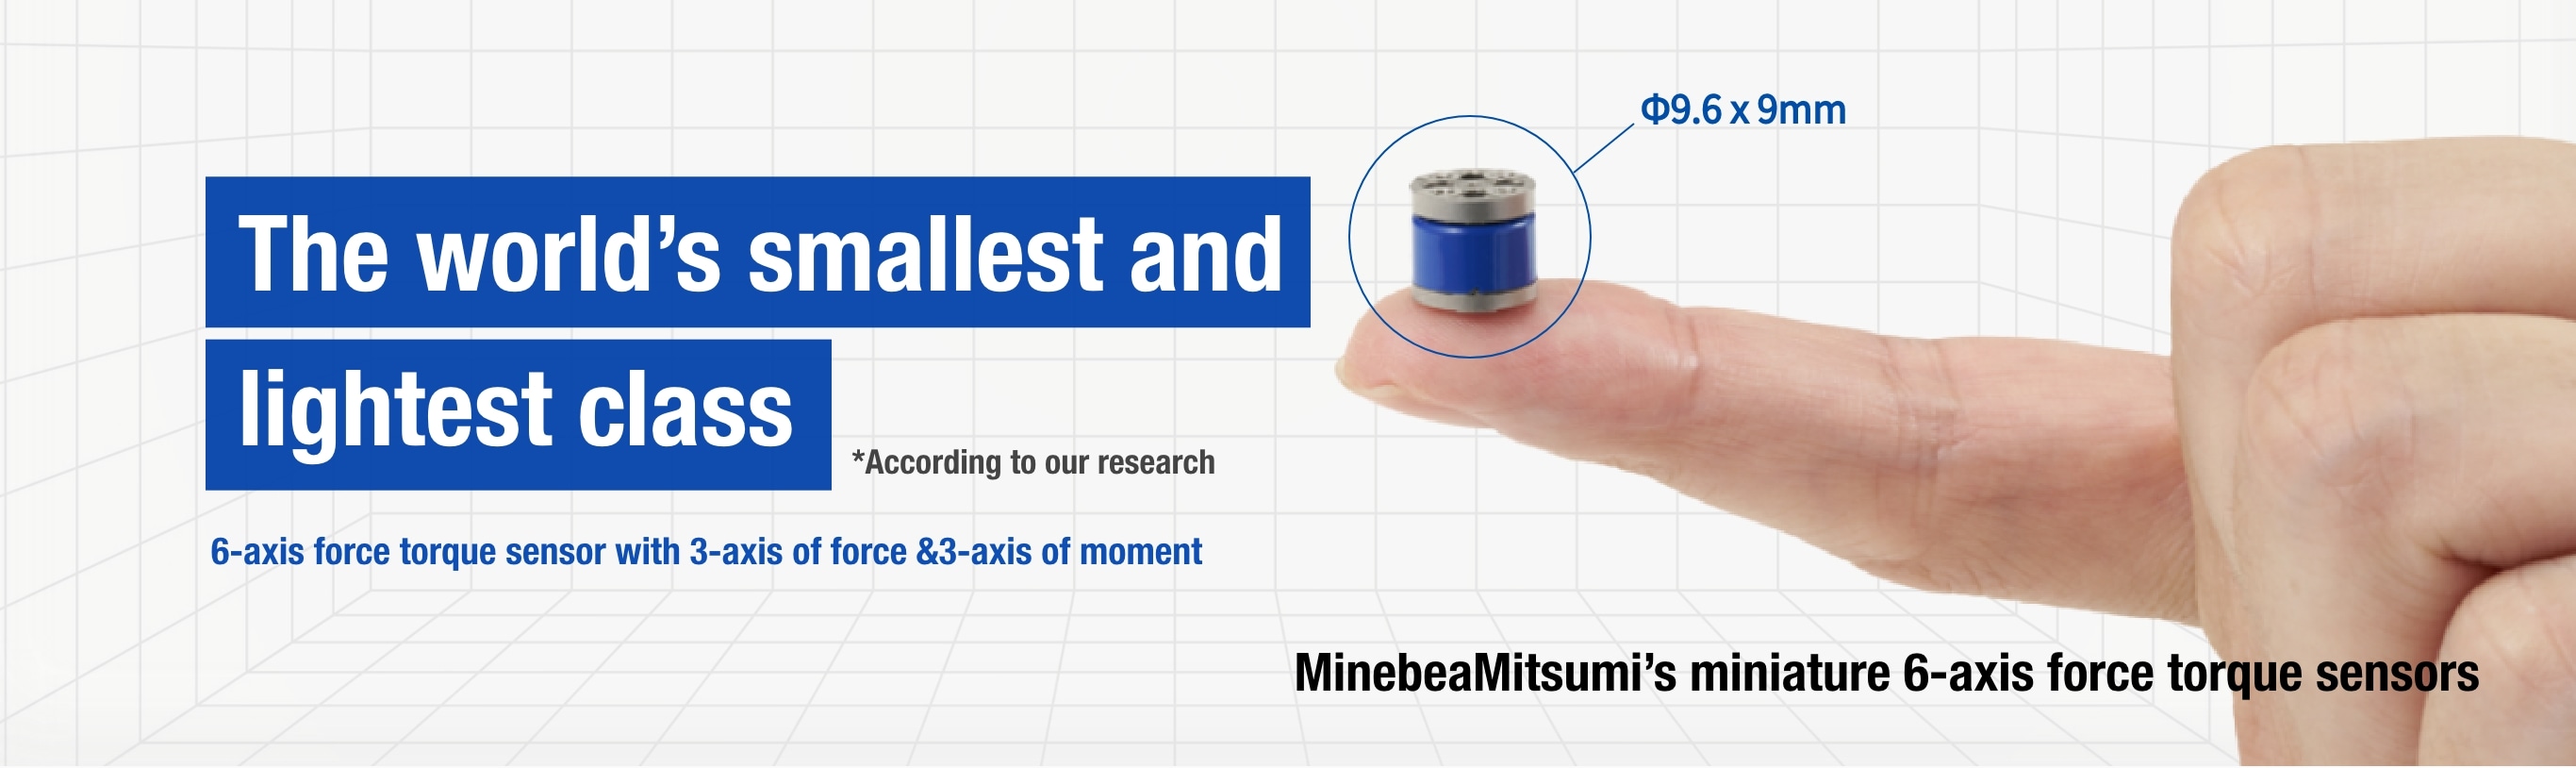 The world's smallest and lightest class
                   *According to our research
                   6-axis force torque sensor with 3-axis of force & 3-axis of moment Φ9.6 x 9mm MinebeaMitsumi’s miniature 6-axis force torque sensors